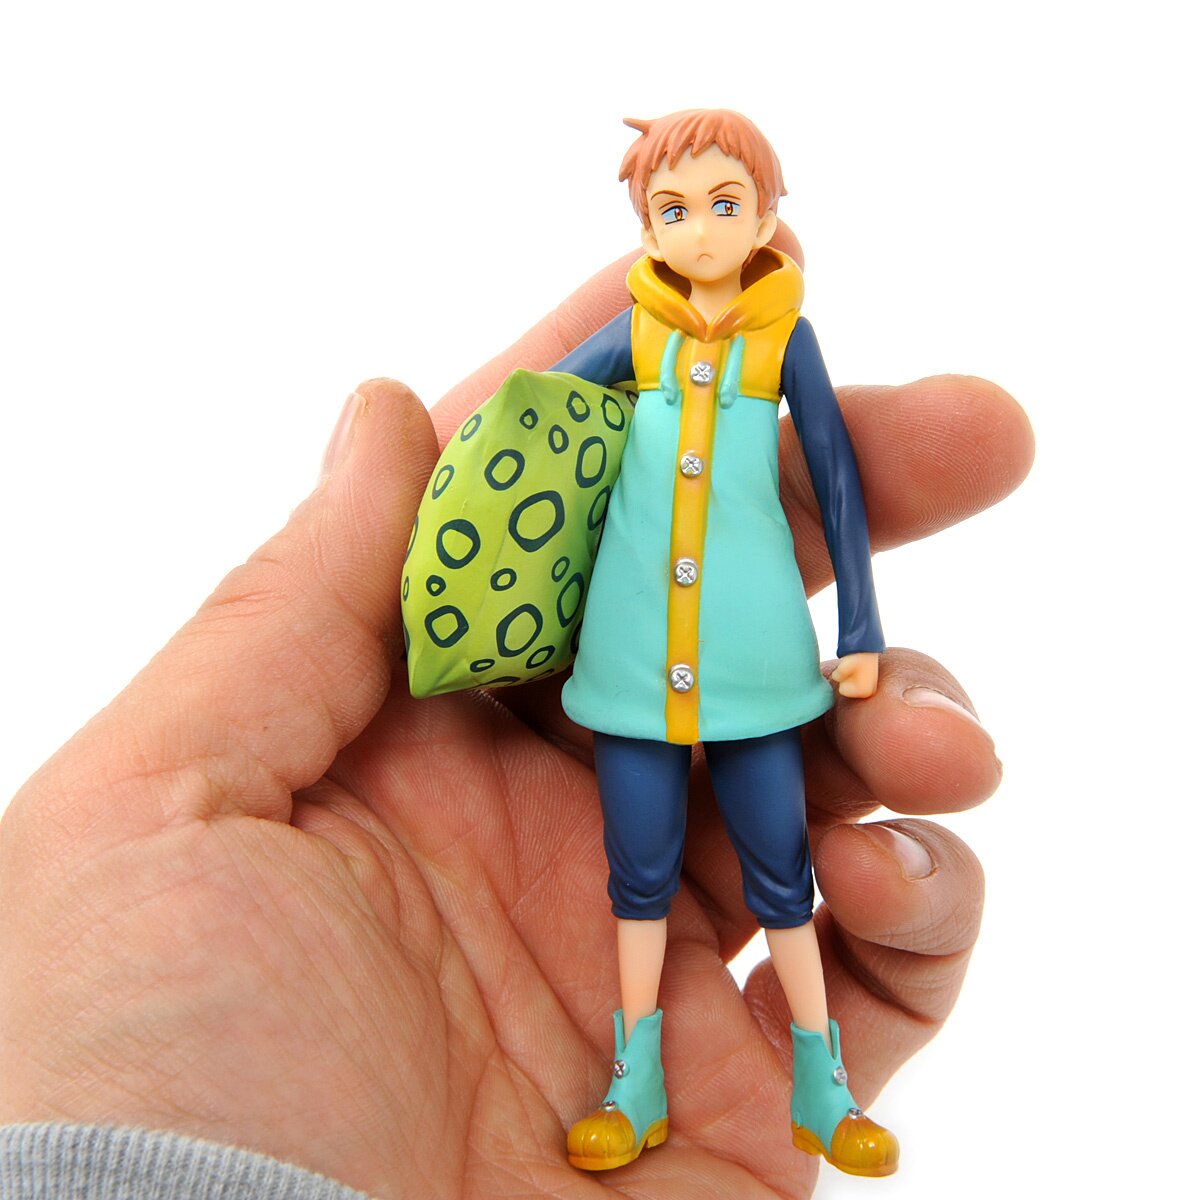 The Seven Deadly Sins Mofumofu Mini Towel King (Anime Toy) - HobbySearch  Anime Goods Store